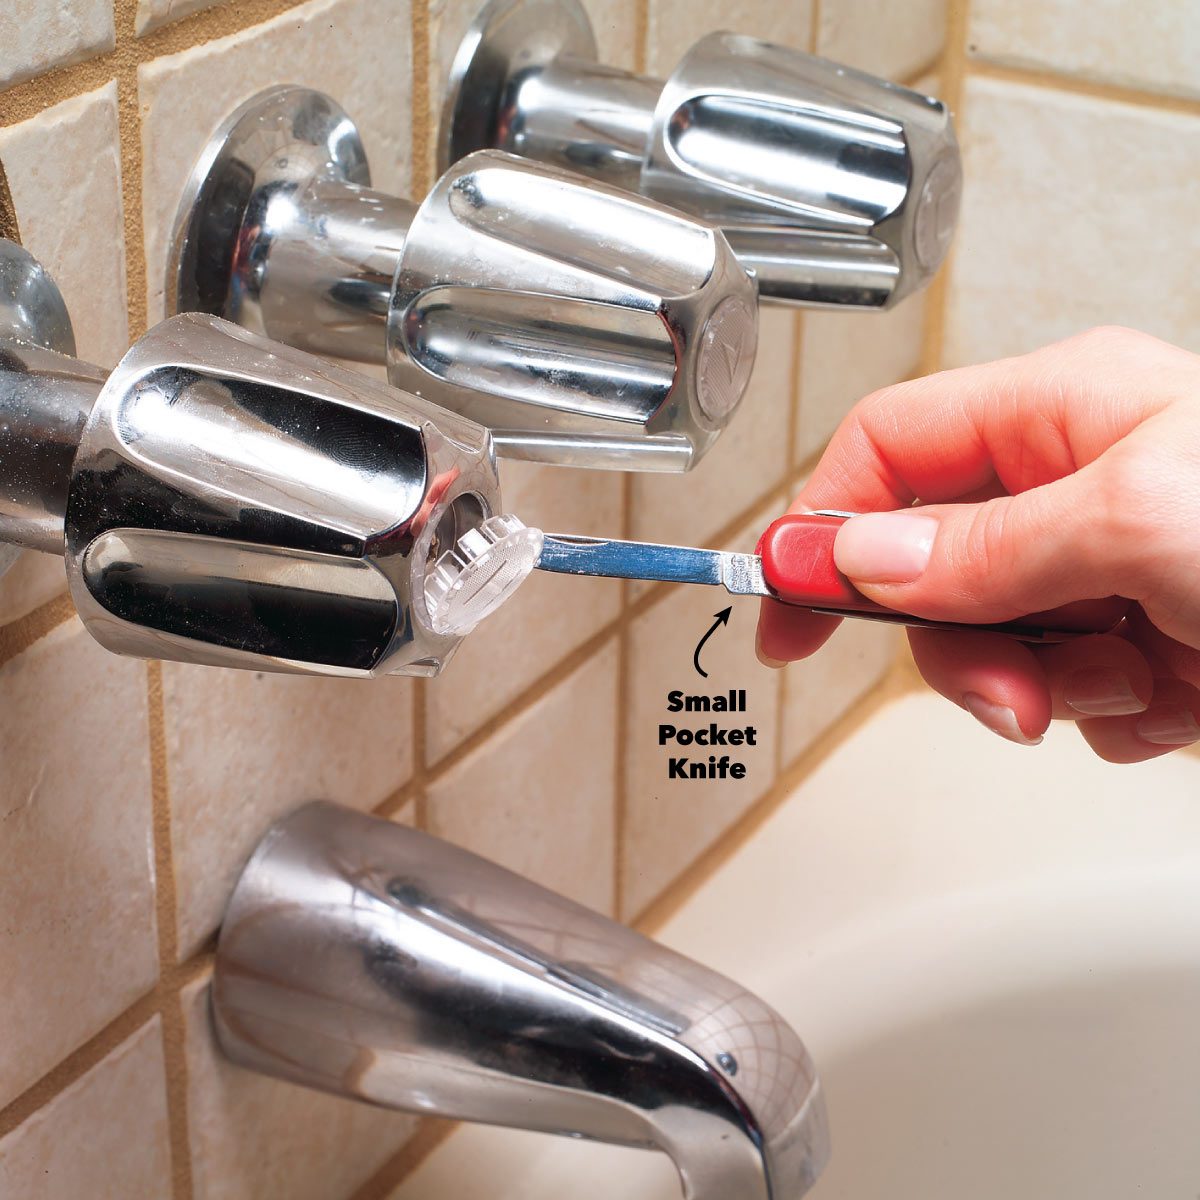 How To Fix A Leaking Bathtub Faucet Family Handyman